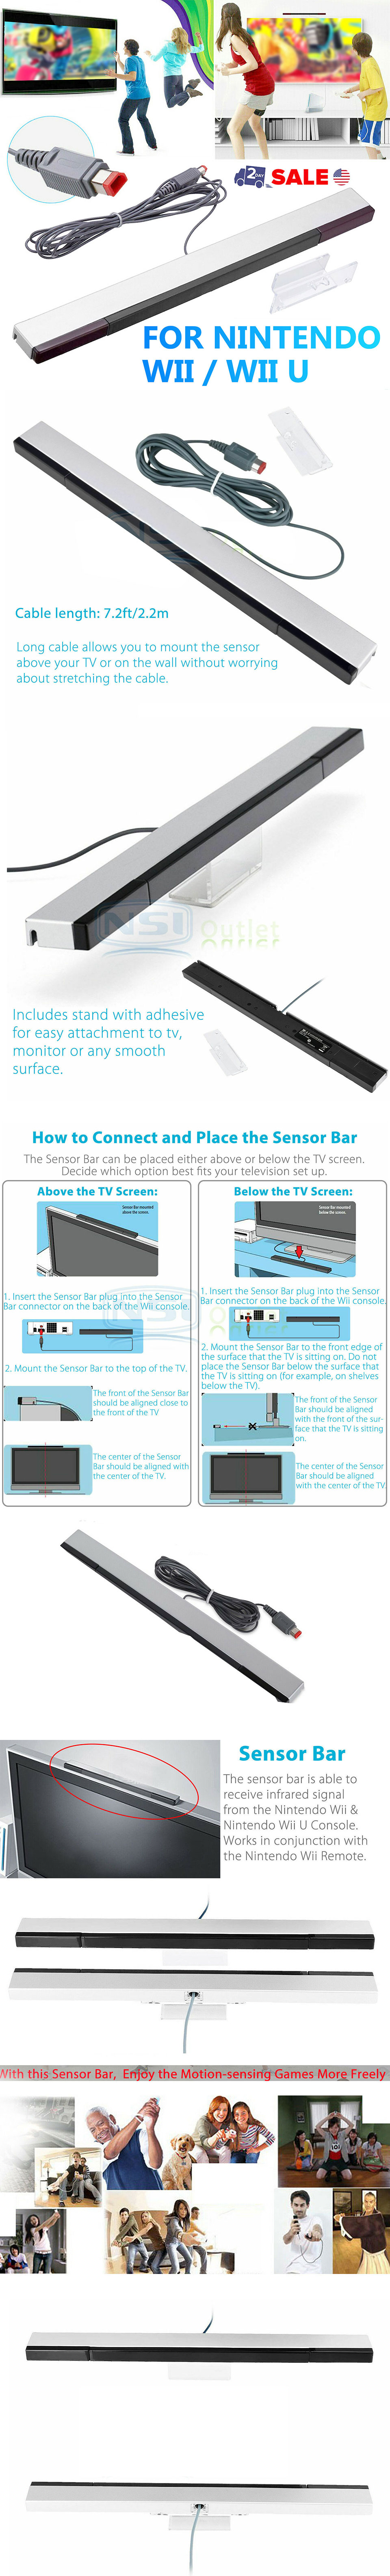 how to use the wii without a sensor bar